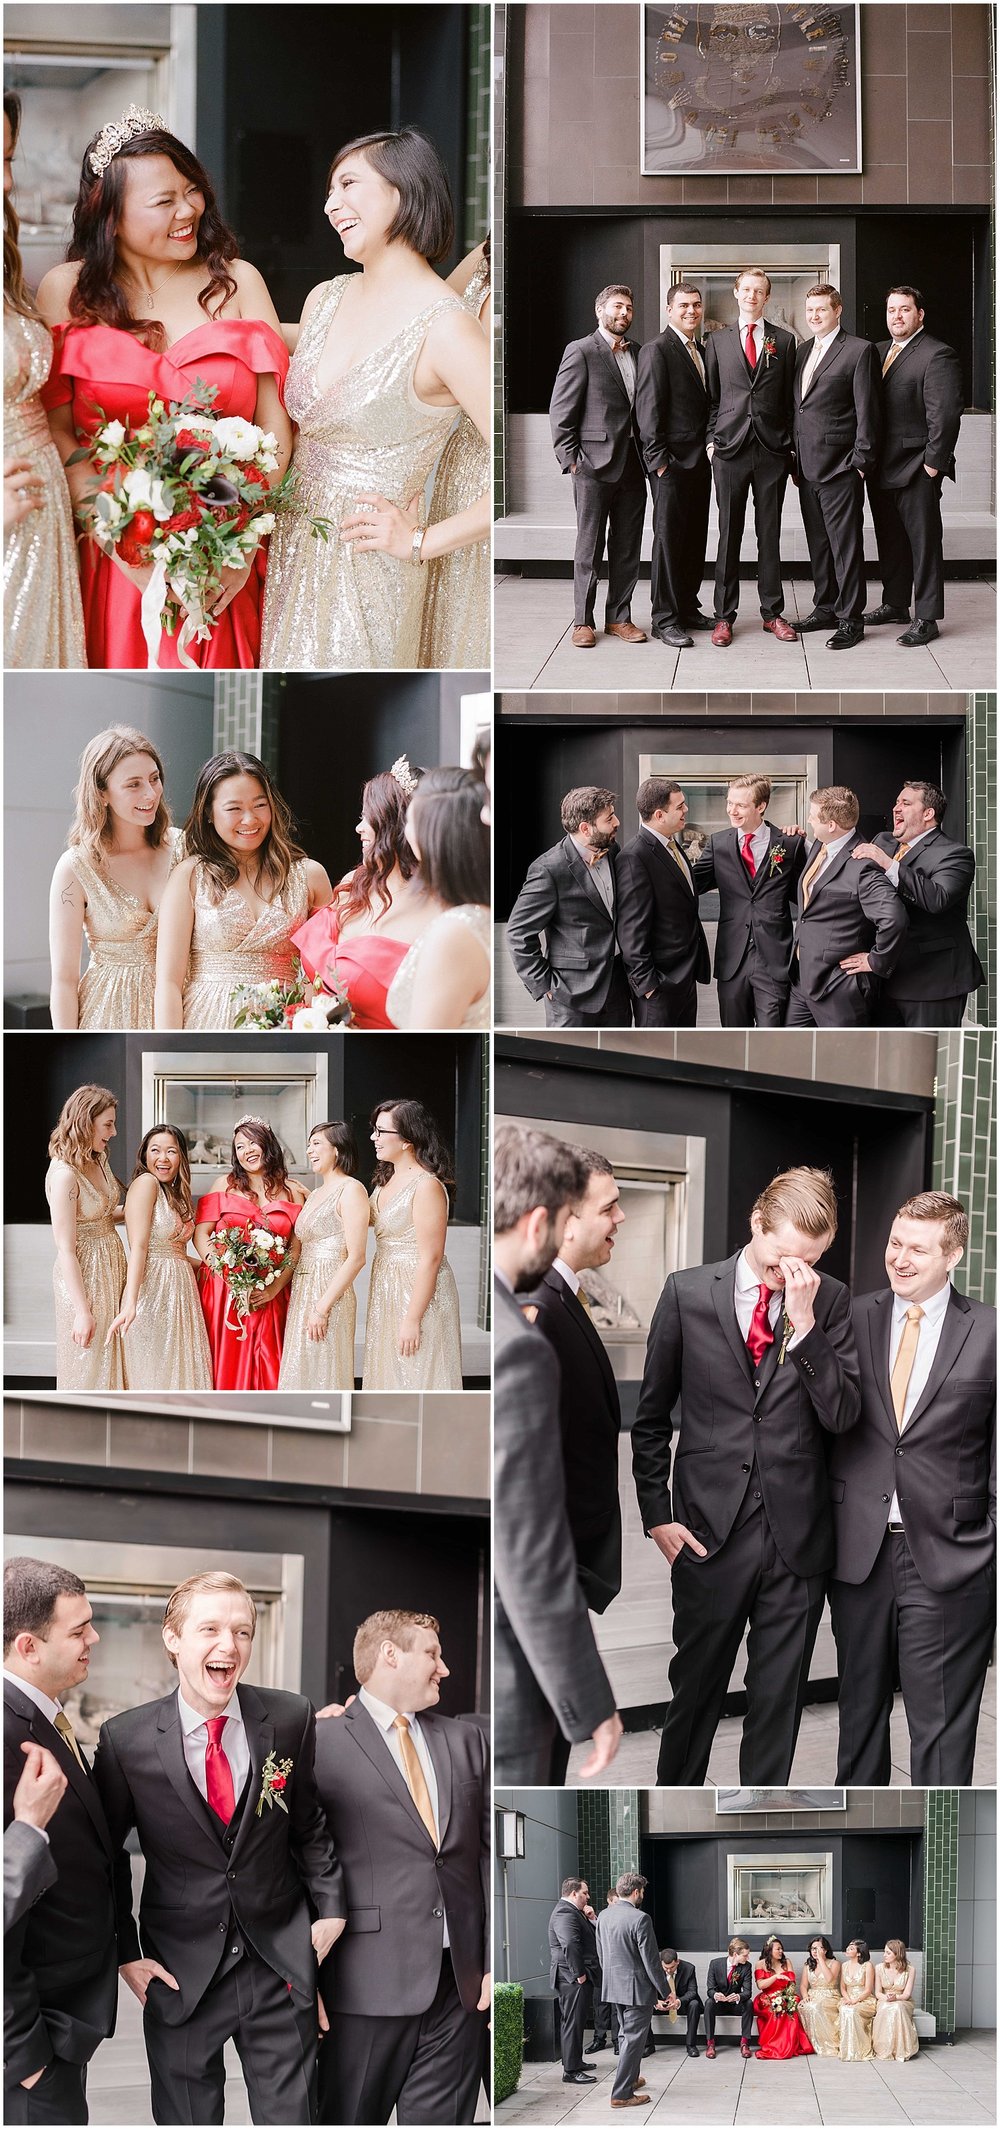 bridal party photos at an intimate wedding in hoboken new jersey at the W Hotel